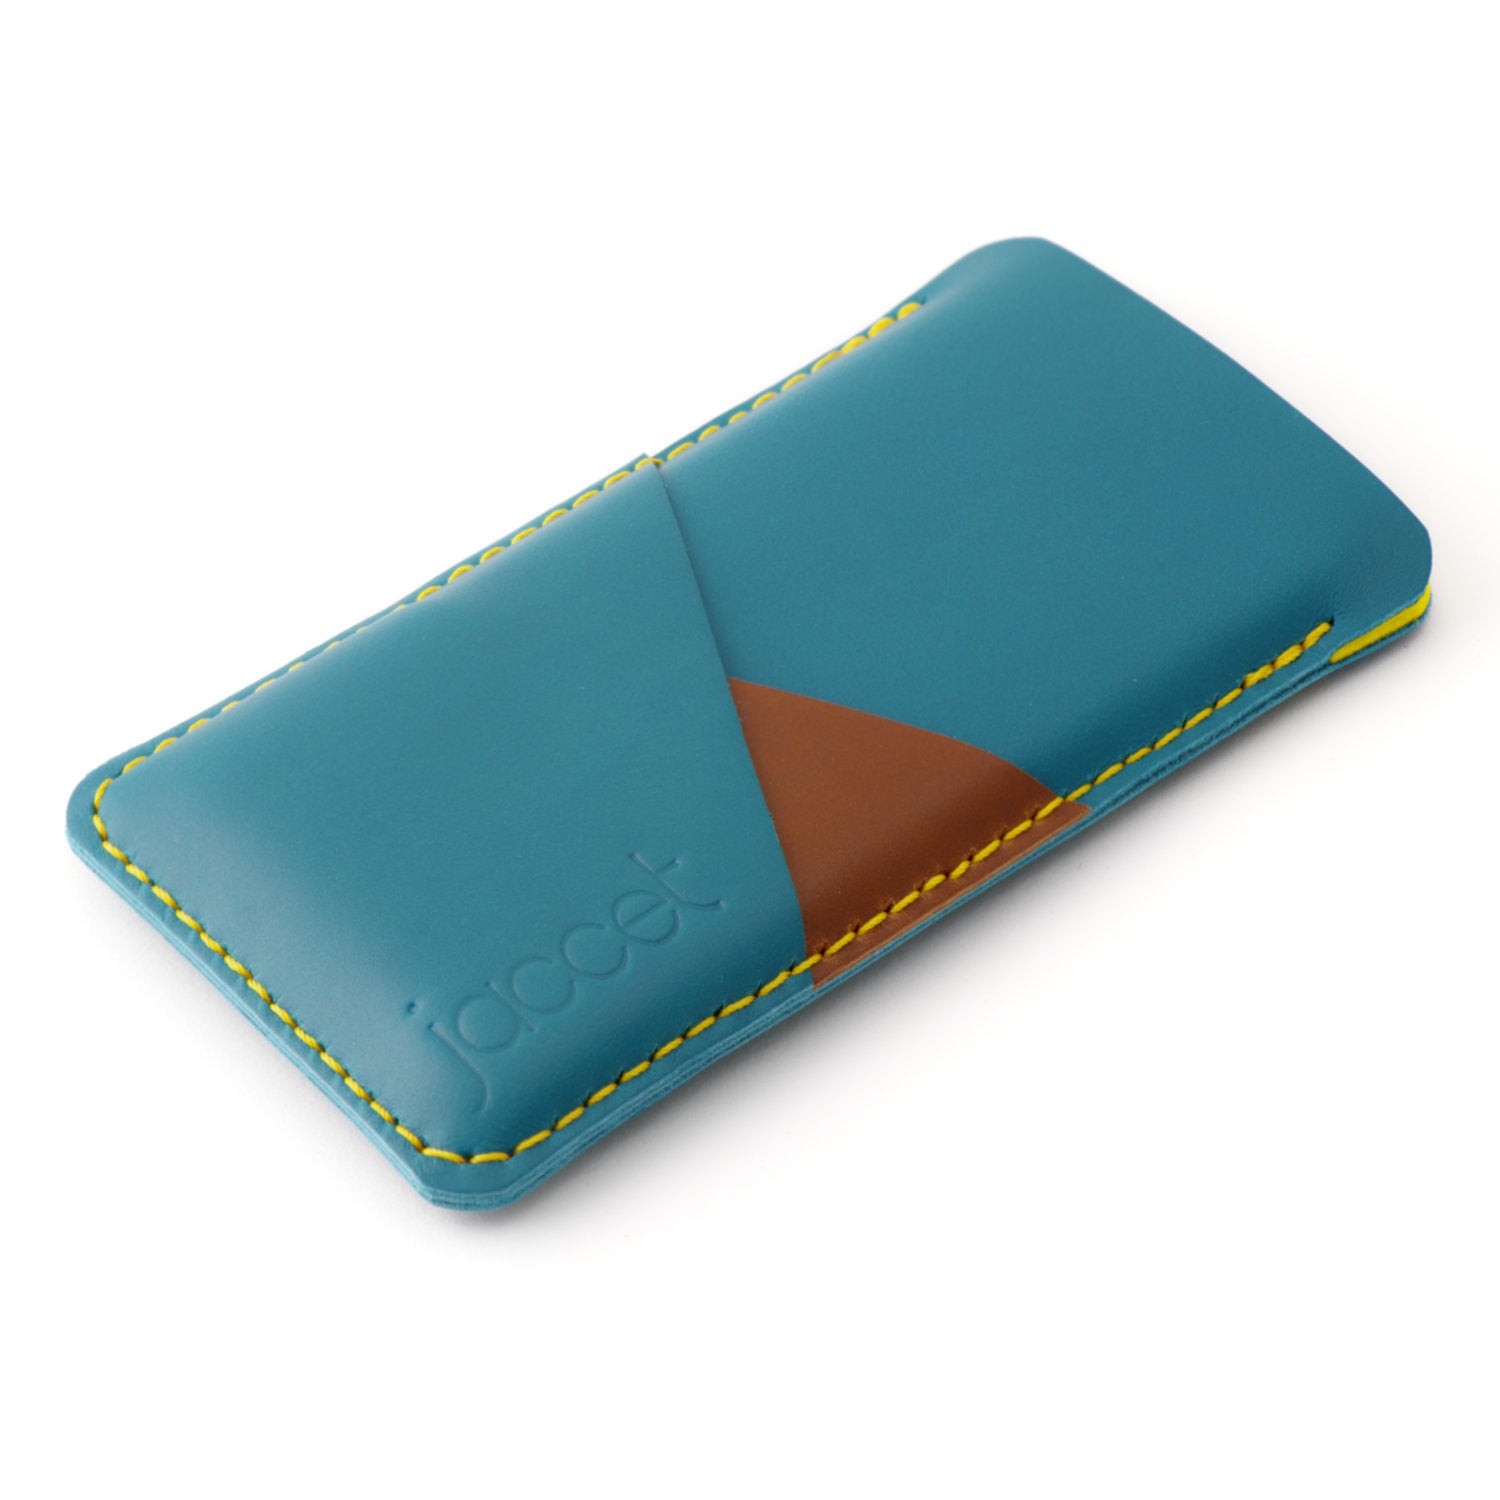 Full-grain leather iPhone sleeve - Turquoise leather with two pockets for cards